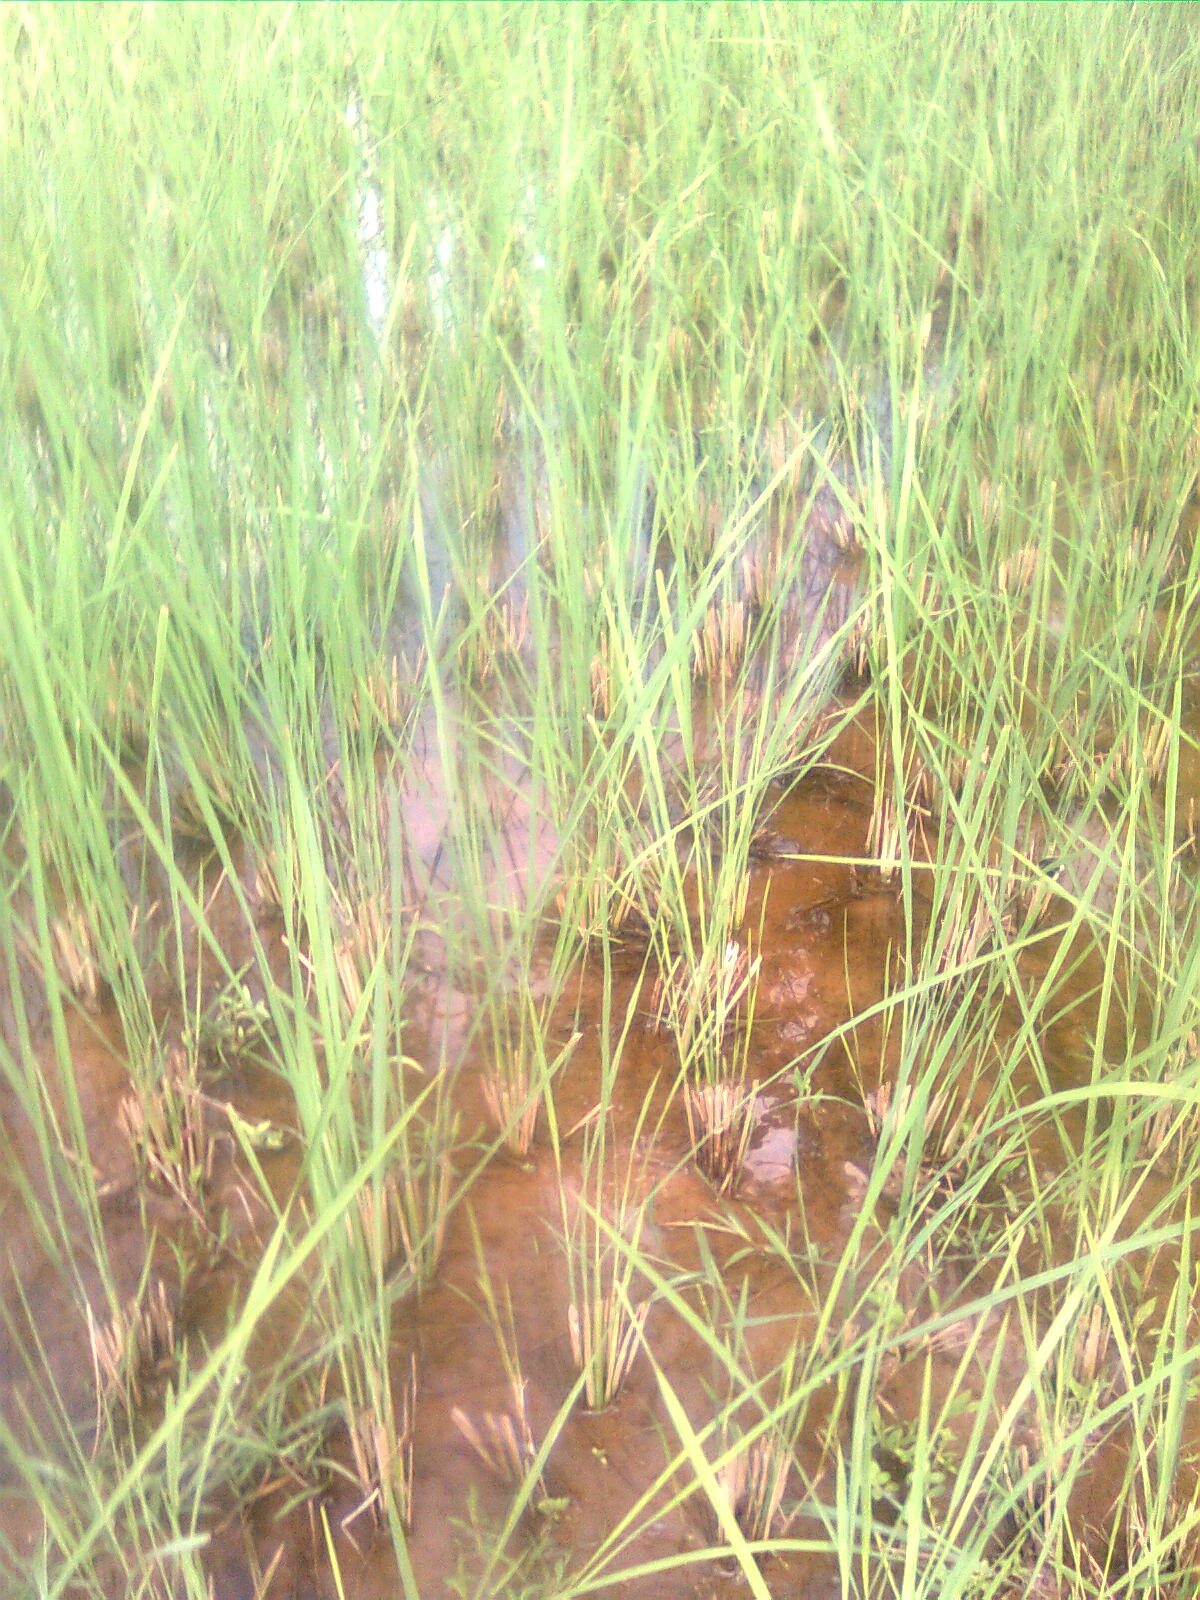 Paddy cultivation in Kerala